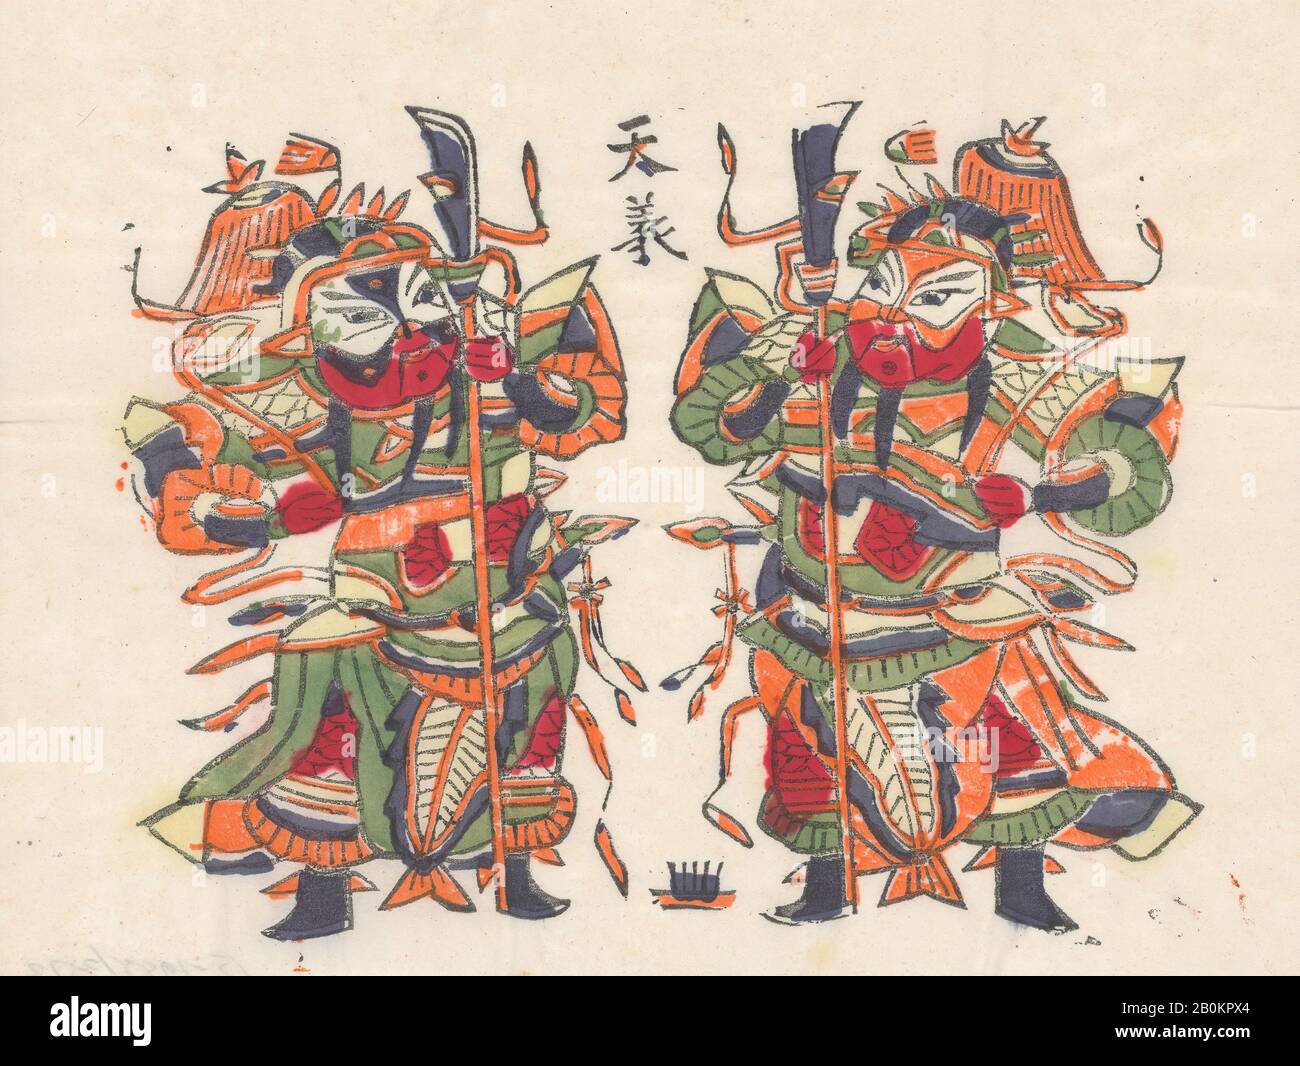 One hundred thirty-five woodblock prints including New Year's pictures (nianhua), door gods, historical figures and Taoist deities, China, 19th–20th century, China, Polychrome woodblock print; ink and color on paper, Image: 9 1/8 in. × 11 in. (23.2 × 27.9 cm), Prints Stock Photo